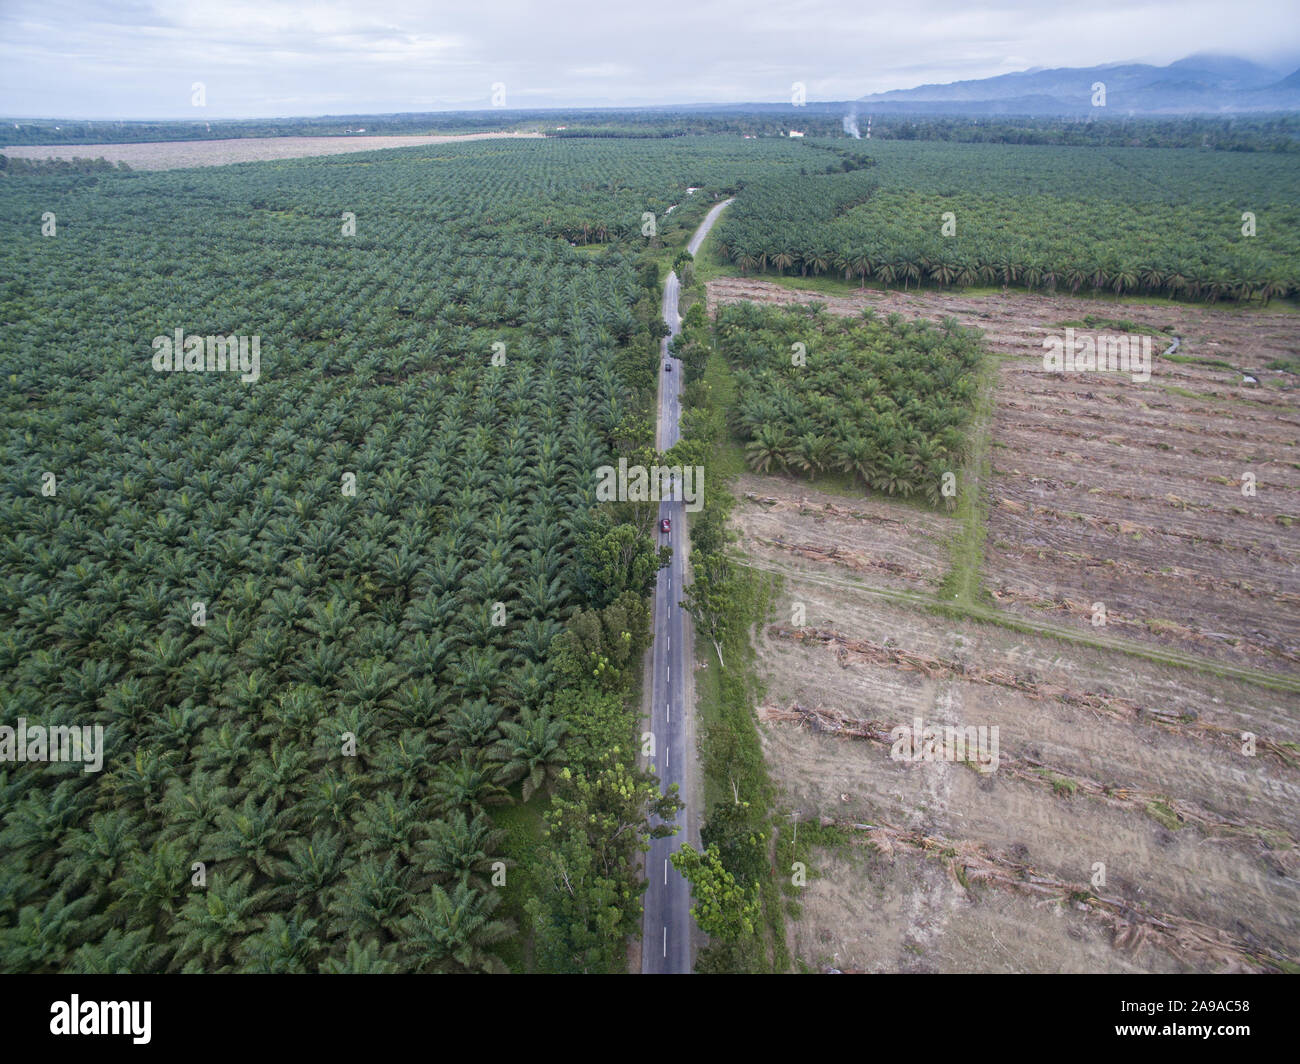 Re-plantation or rejuvenation of Palm Oil tree in Sulawesi Indonesia. Stock Photo